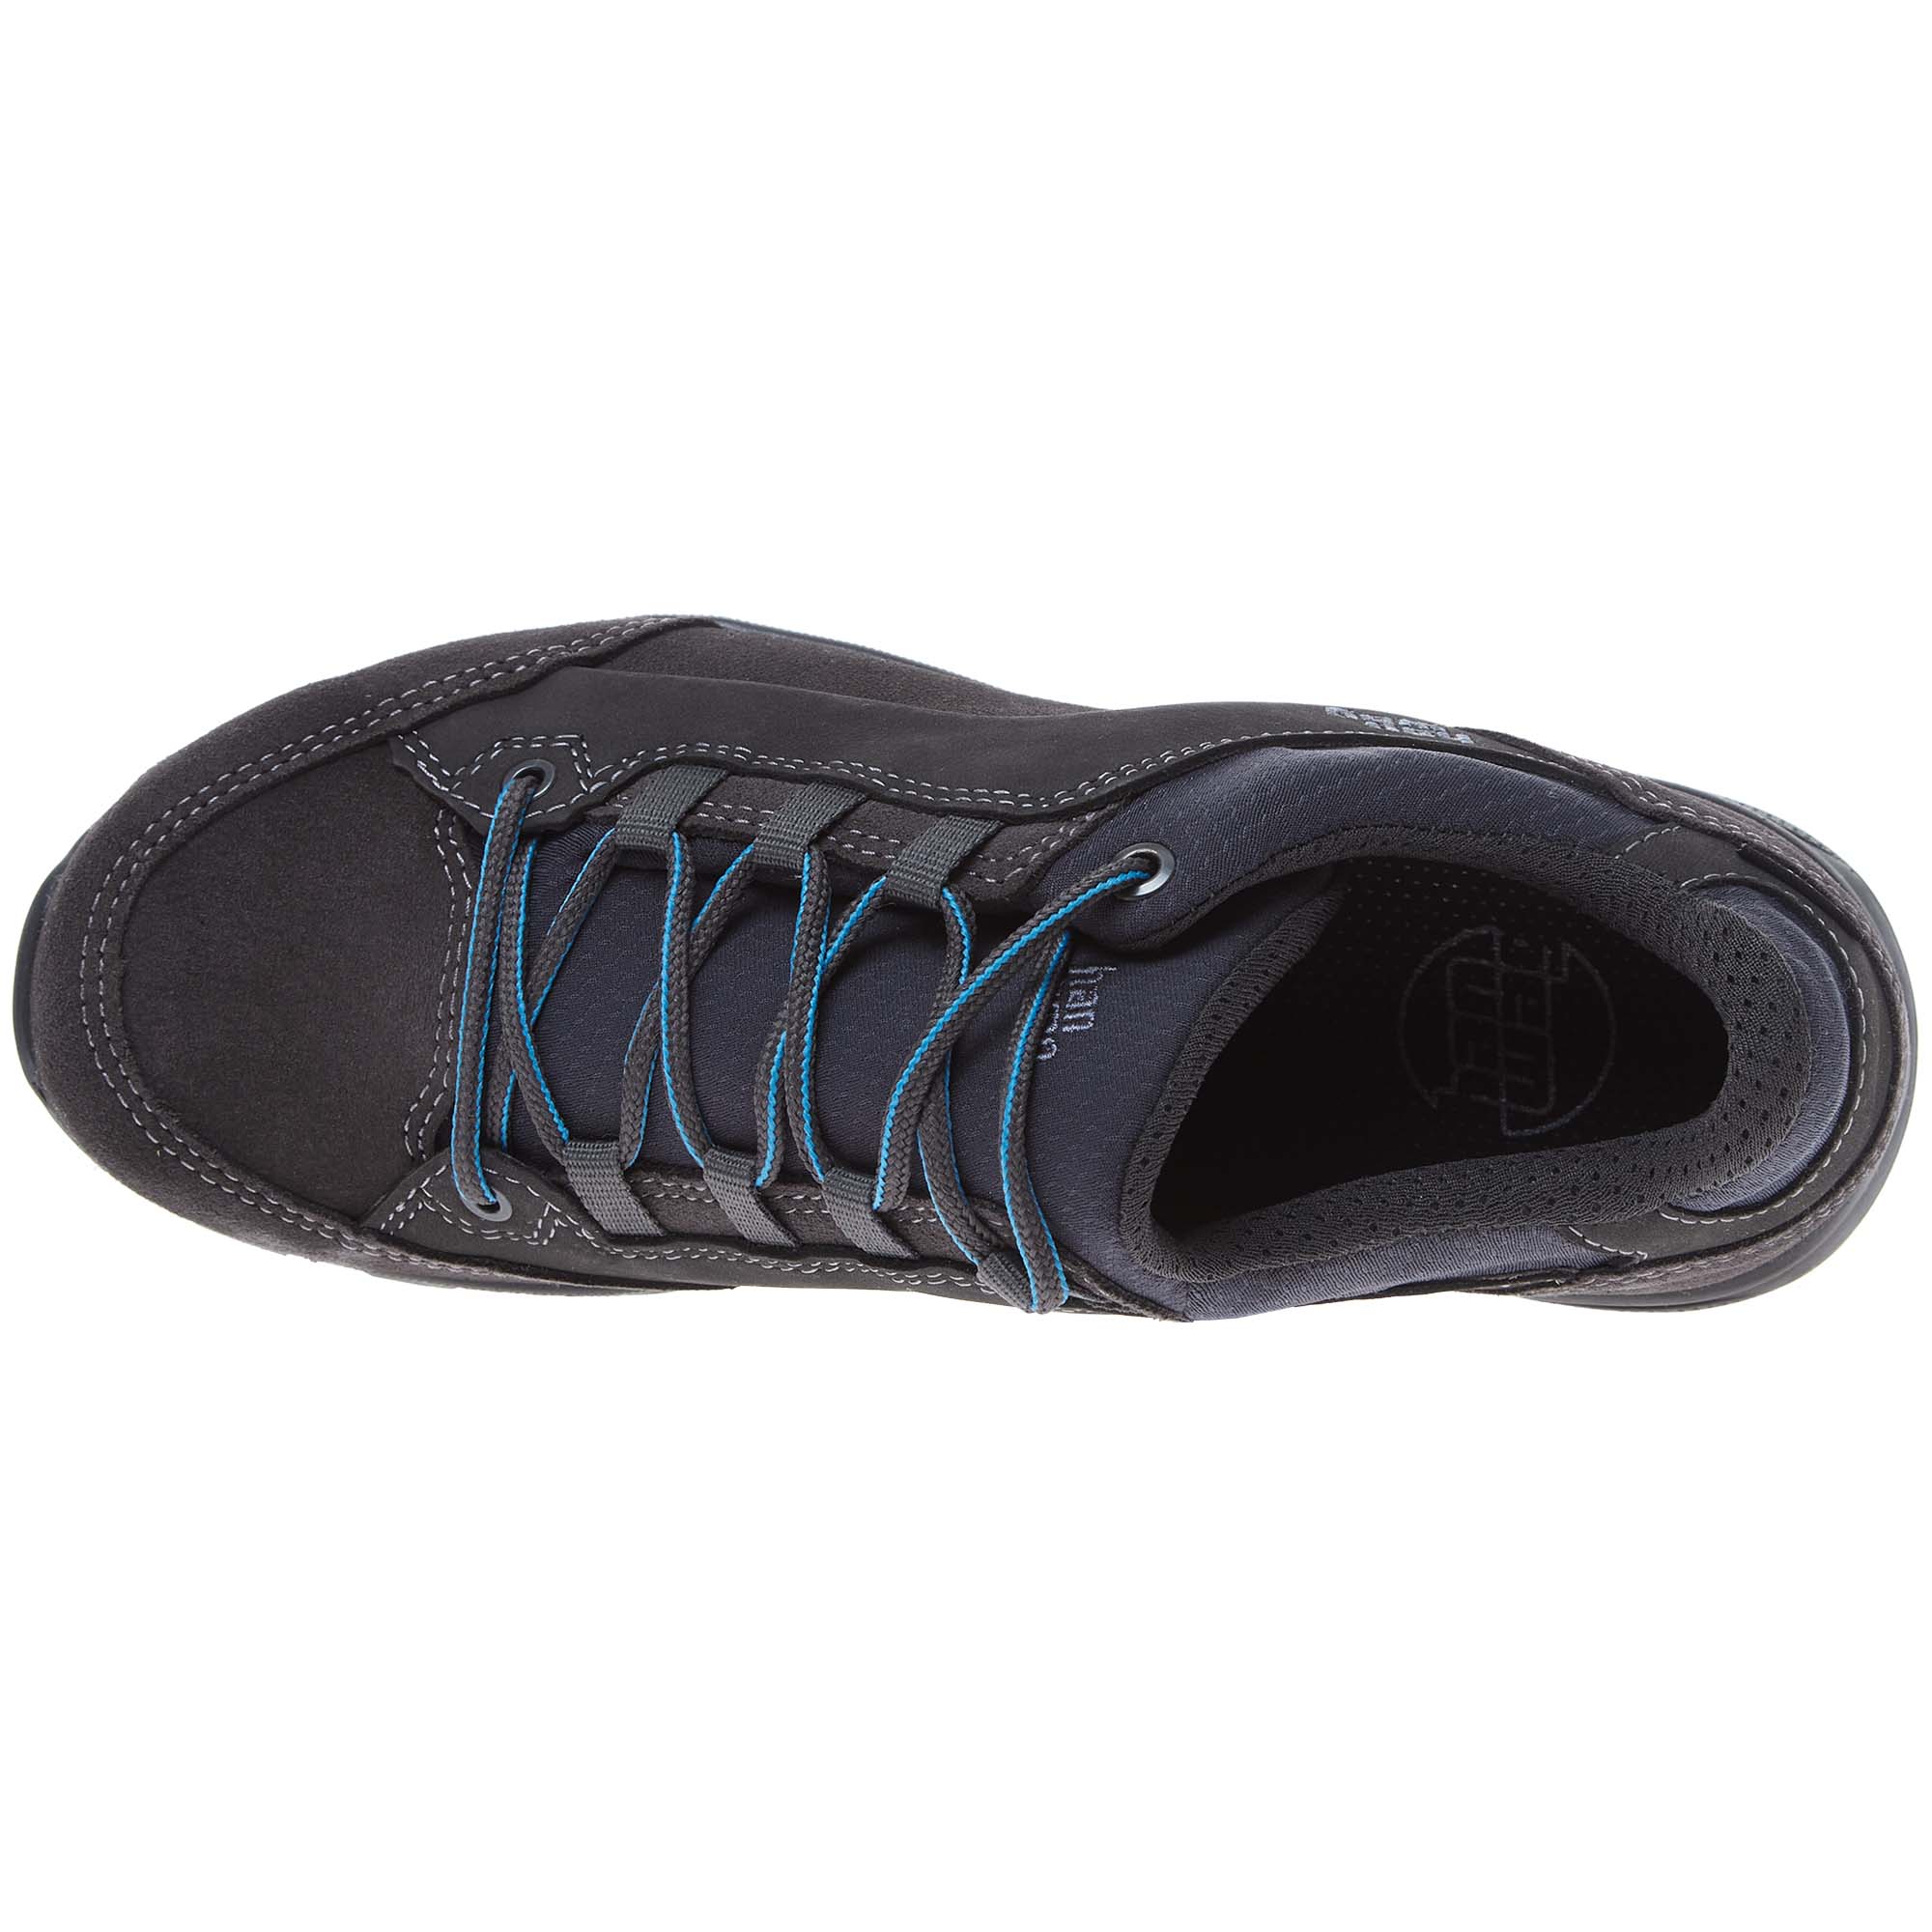 Hanwag Banks Low Lady GTX Hiking Shoes